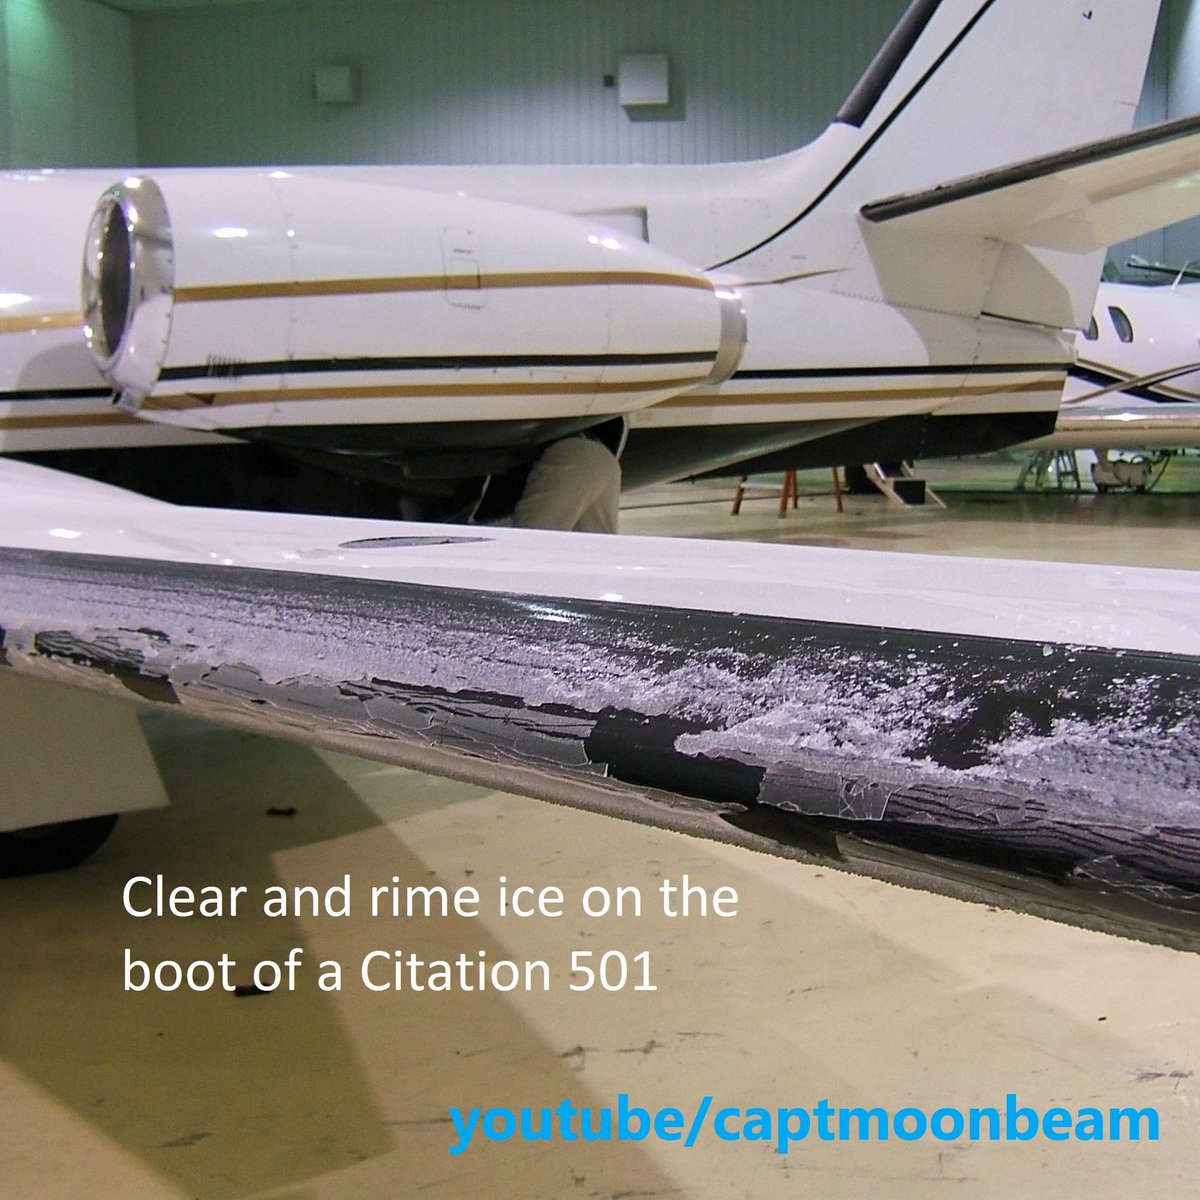 Captmoonbeam on Twitter: clear and rime ice on the wing de-ice boot of a Cessna Citation 501. #captmoonbeam #cessnacitation #cessnacitation501 #aviation #airplane #aircraft #jet #wingicing #deiceboot https://t.co/HF4elD0DNt" / Twitter